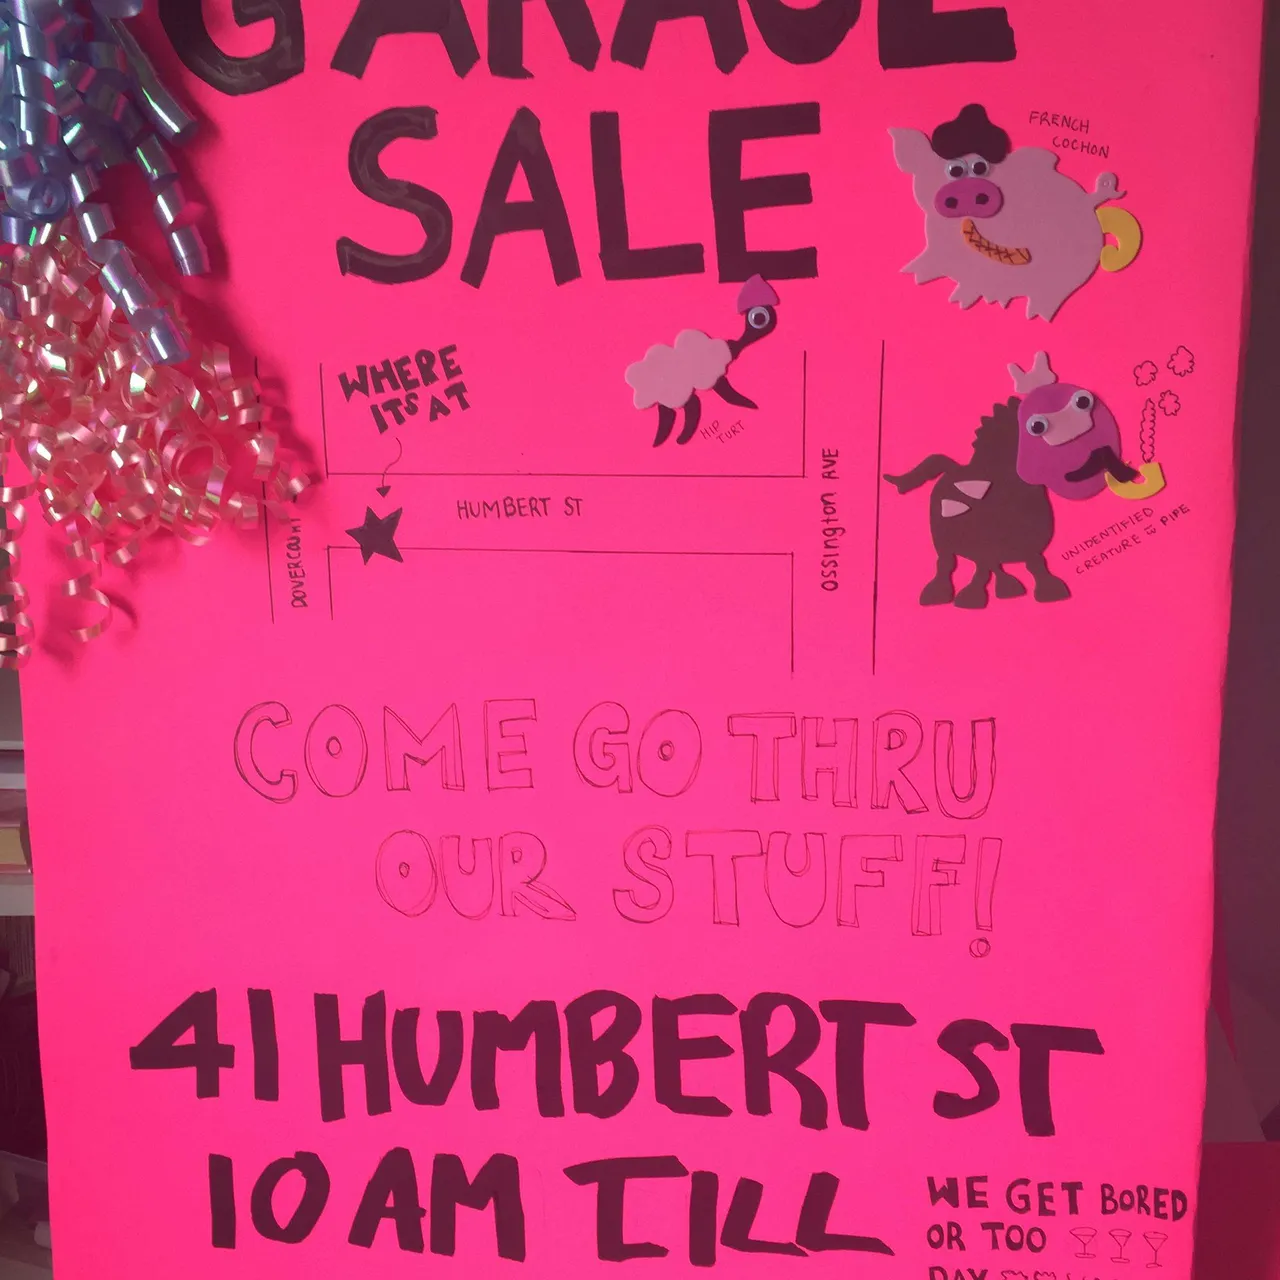 GARAGE SALE - Queen and Ossington, Sunday 23rd photo 1